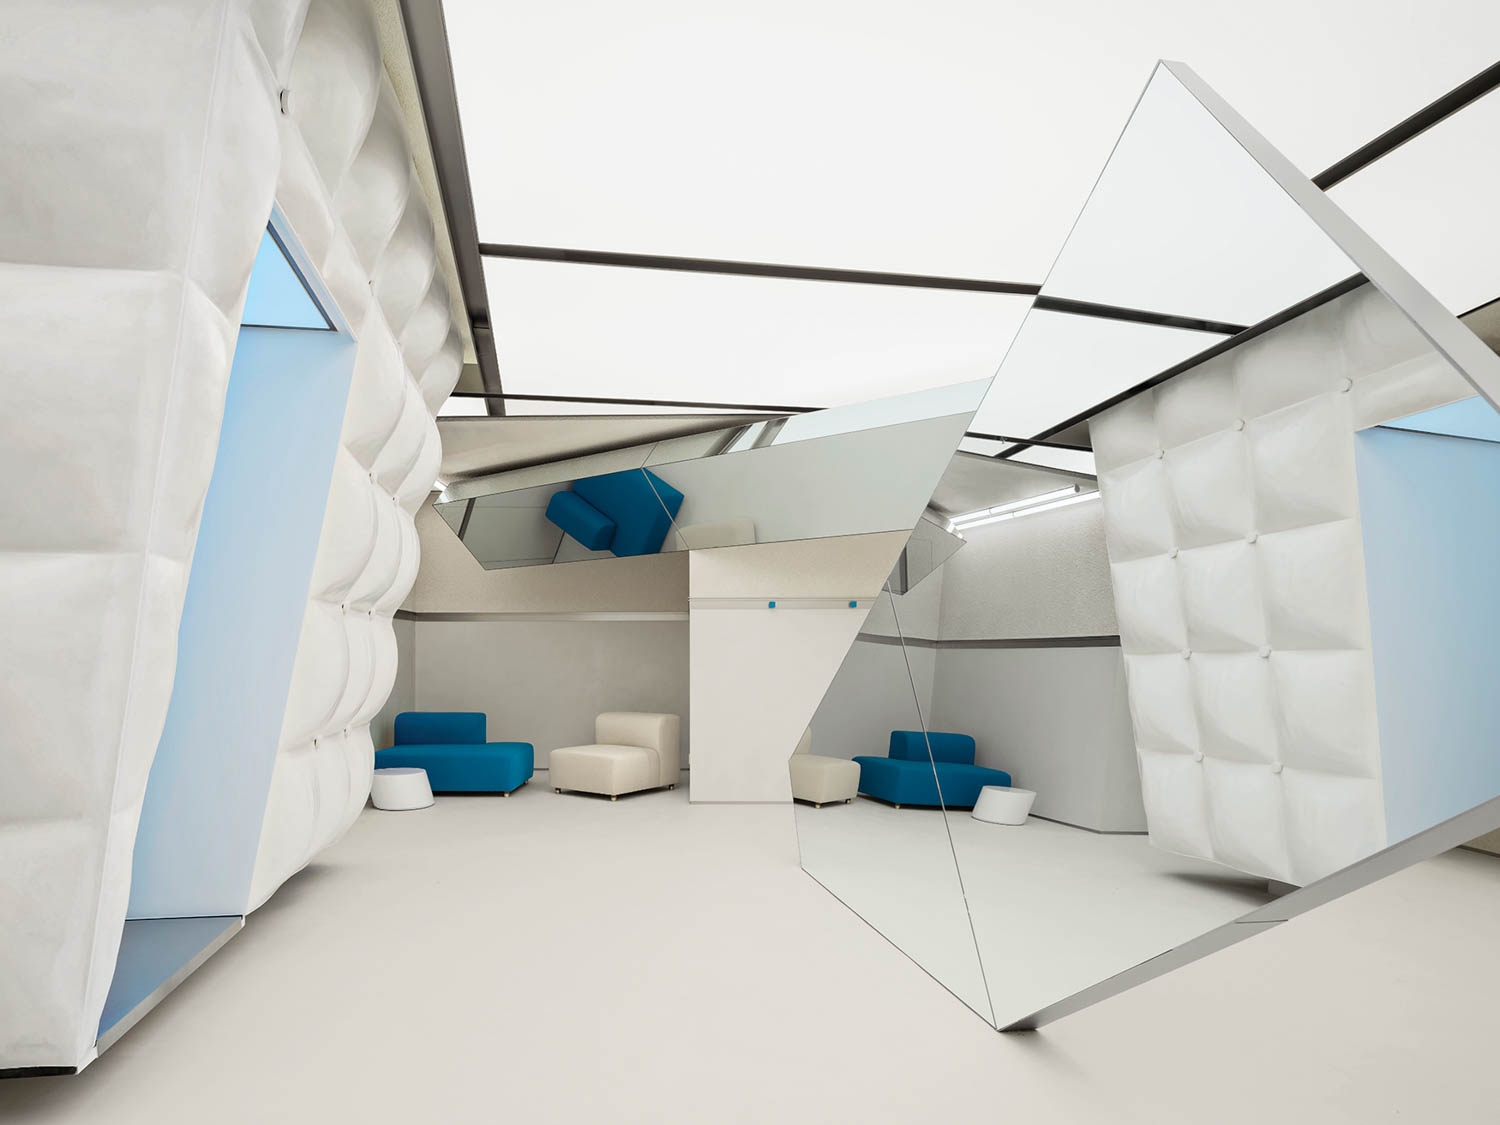 quilted-coat like surfaces and angled mirrors make up the space in Skypeople